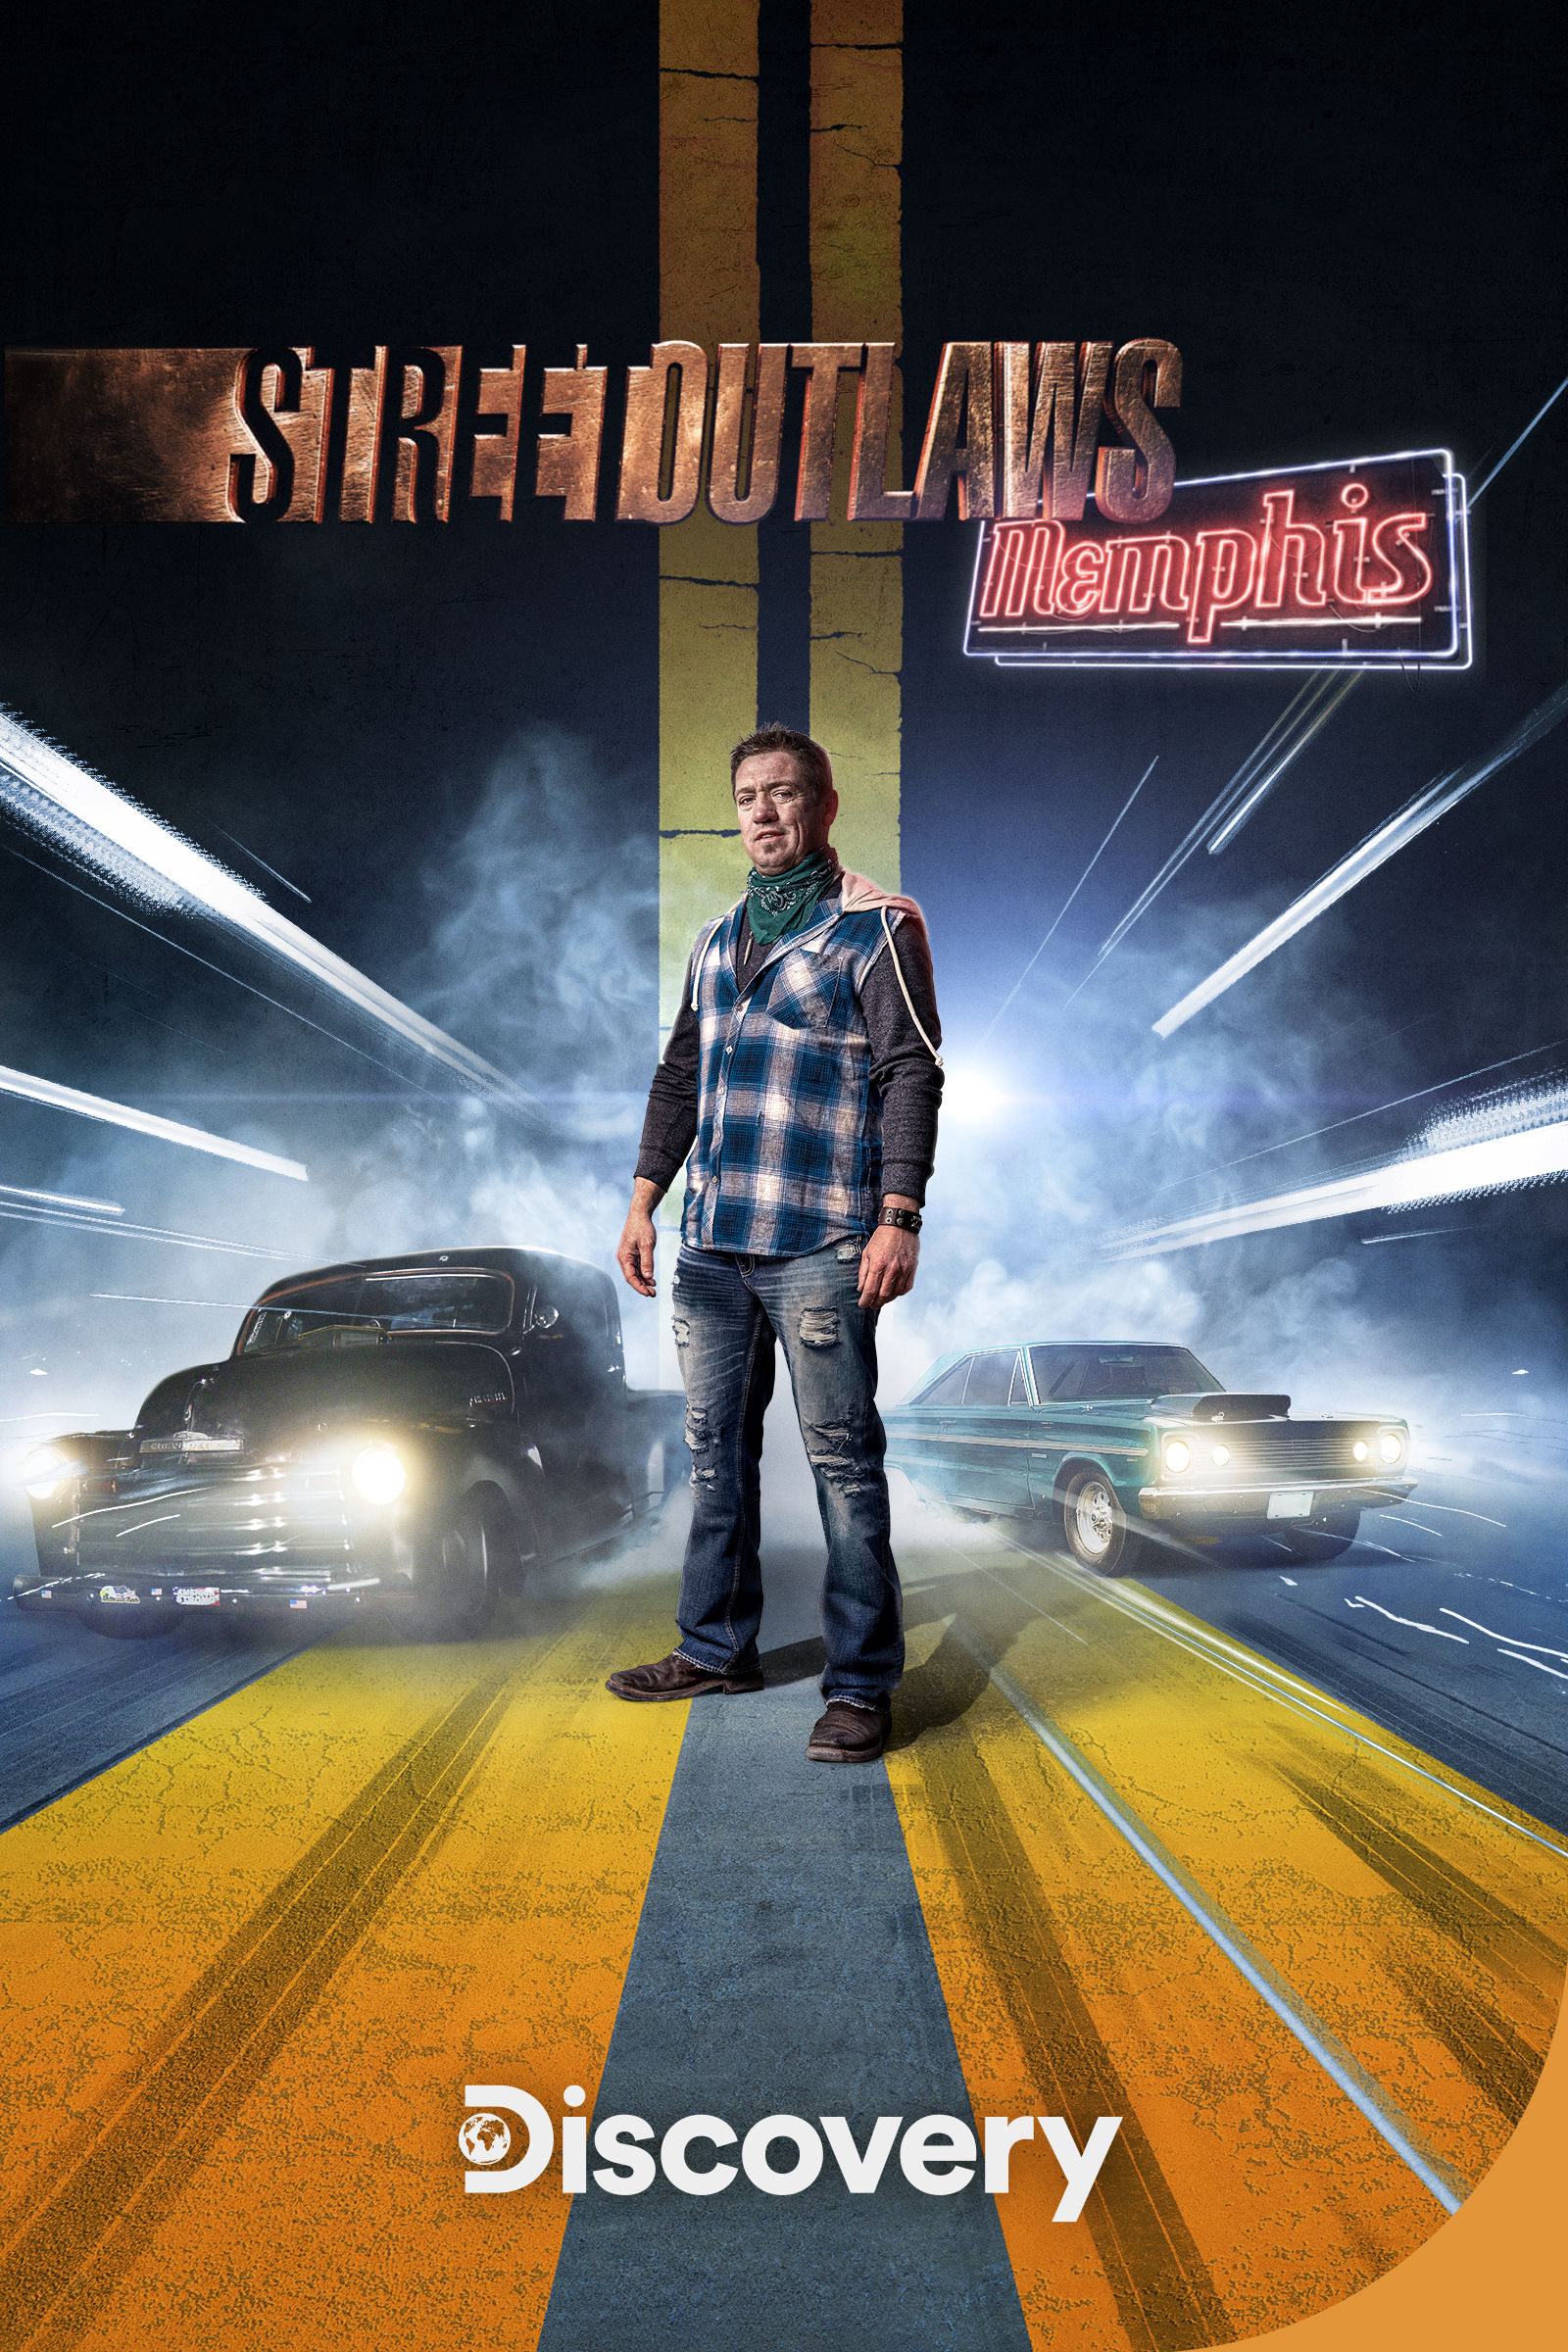 Facts You Didn’t Know About The Cast Of Street Outlaws